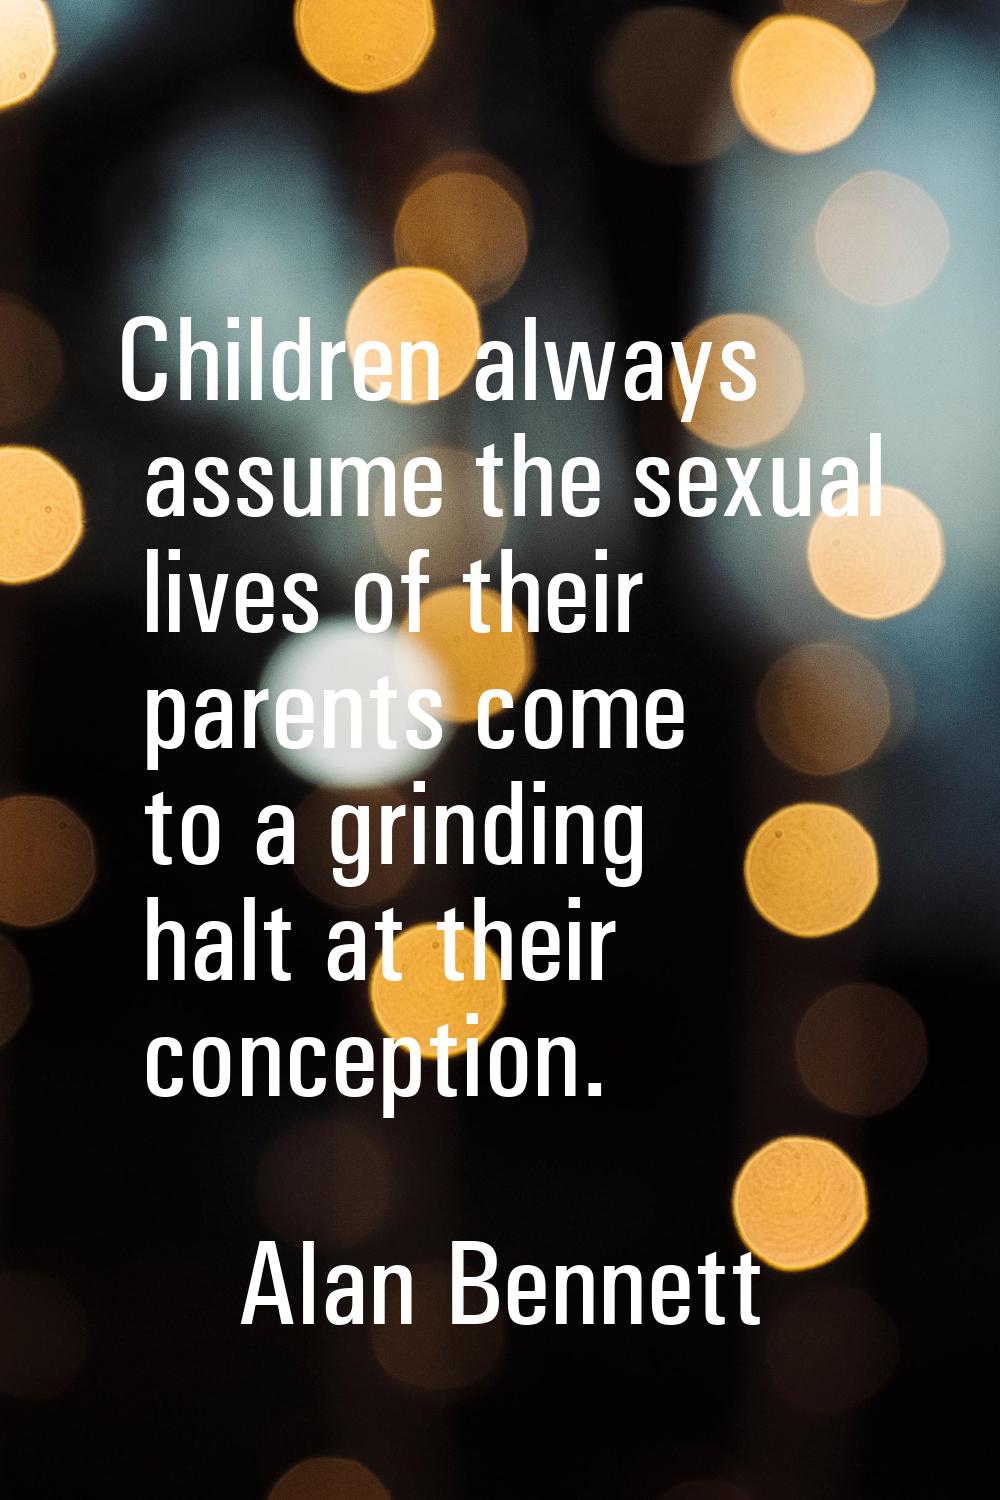 Children always assume the sexual lives of their parents come to a grinding halt at their conceptio